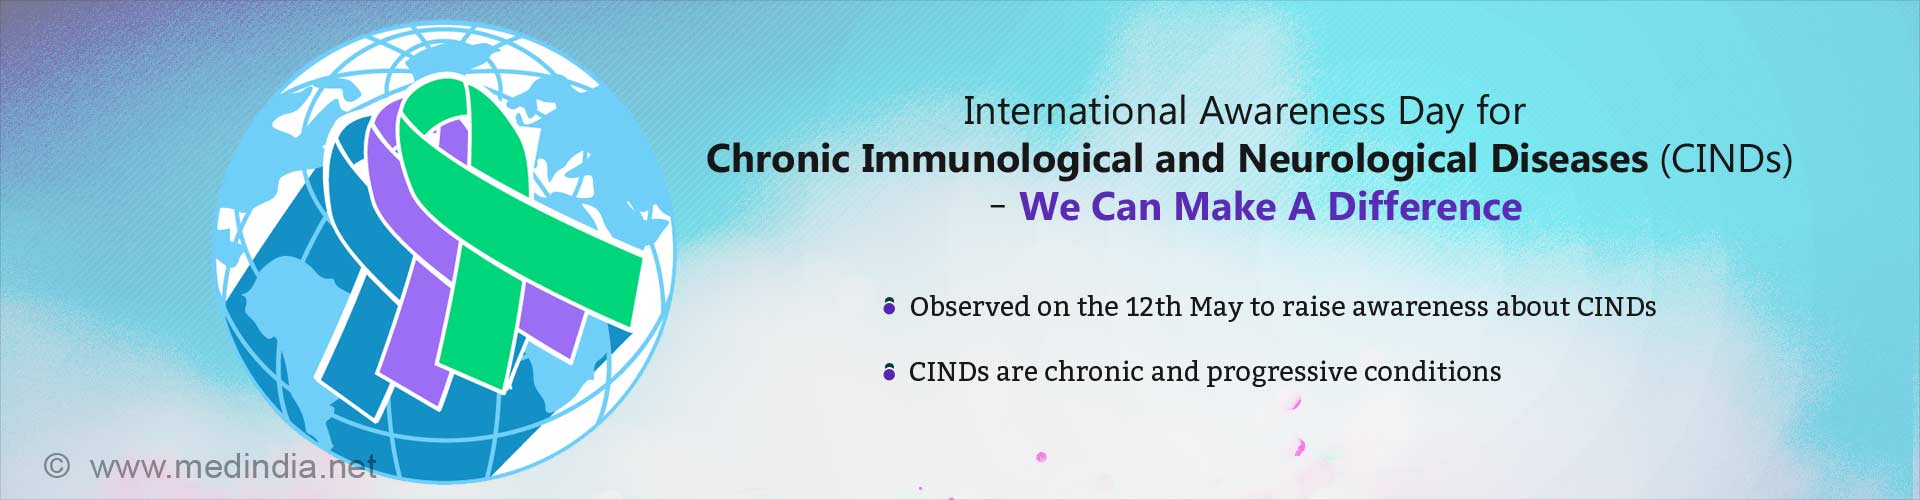 international Awareness Day for Chronic Immunological and Neurological Diseases (CINDs) 